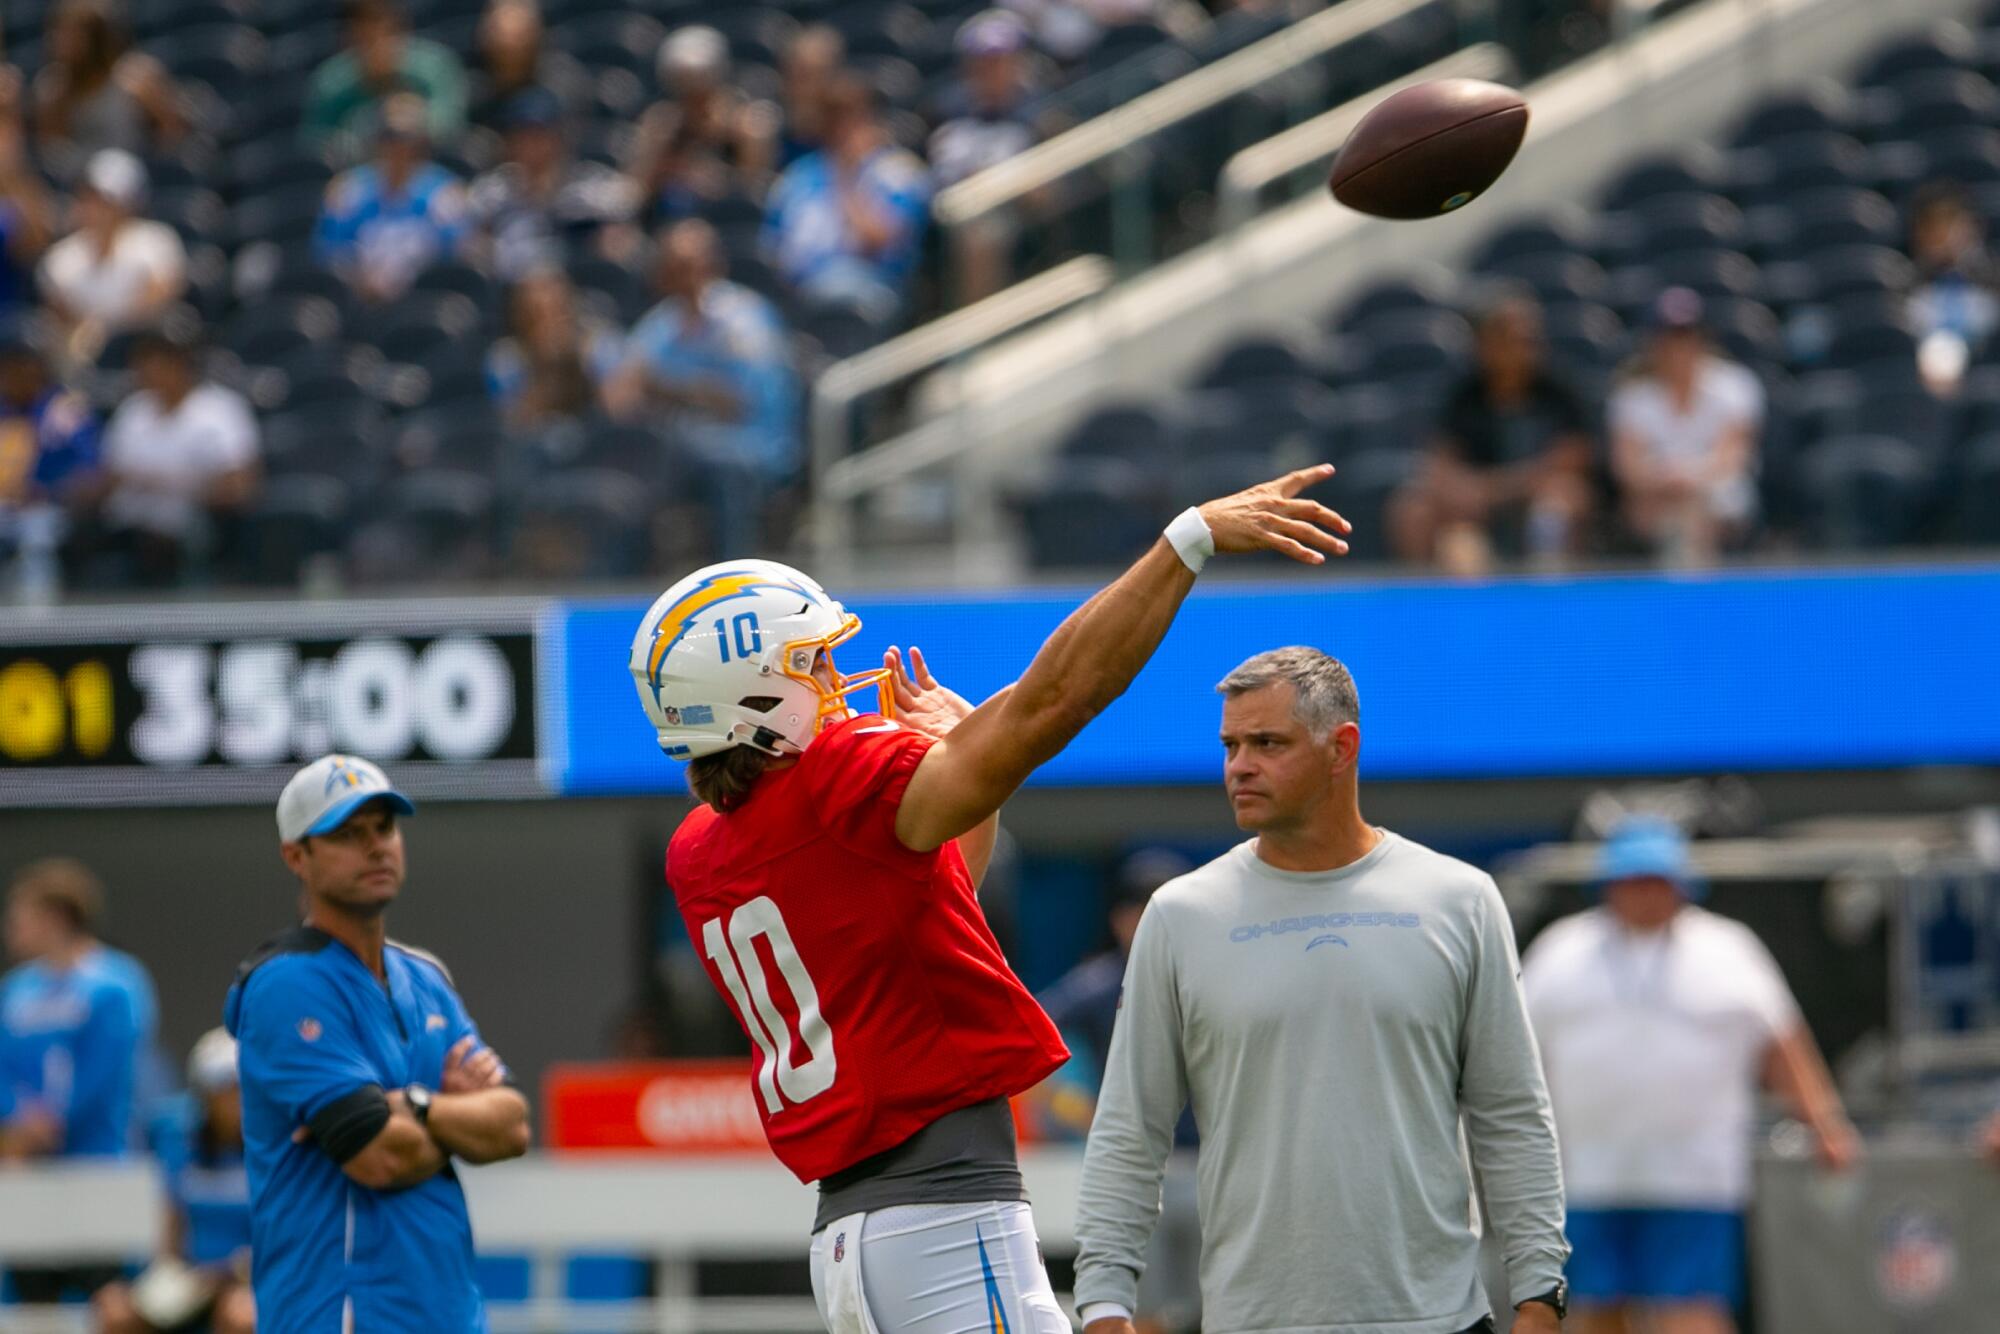 Chargers quarterback Justin Herbert throws a pass at SoFi Stadium during the Fan Fest and open practice on Sunday.